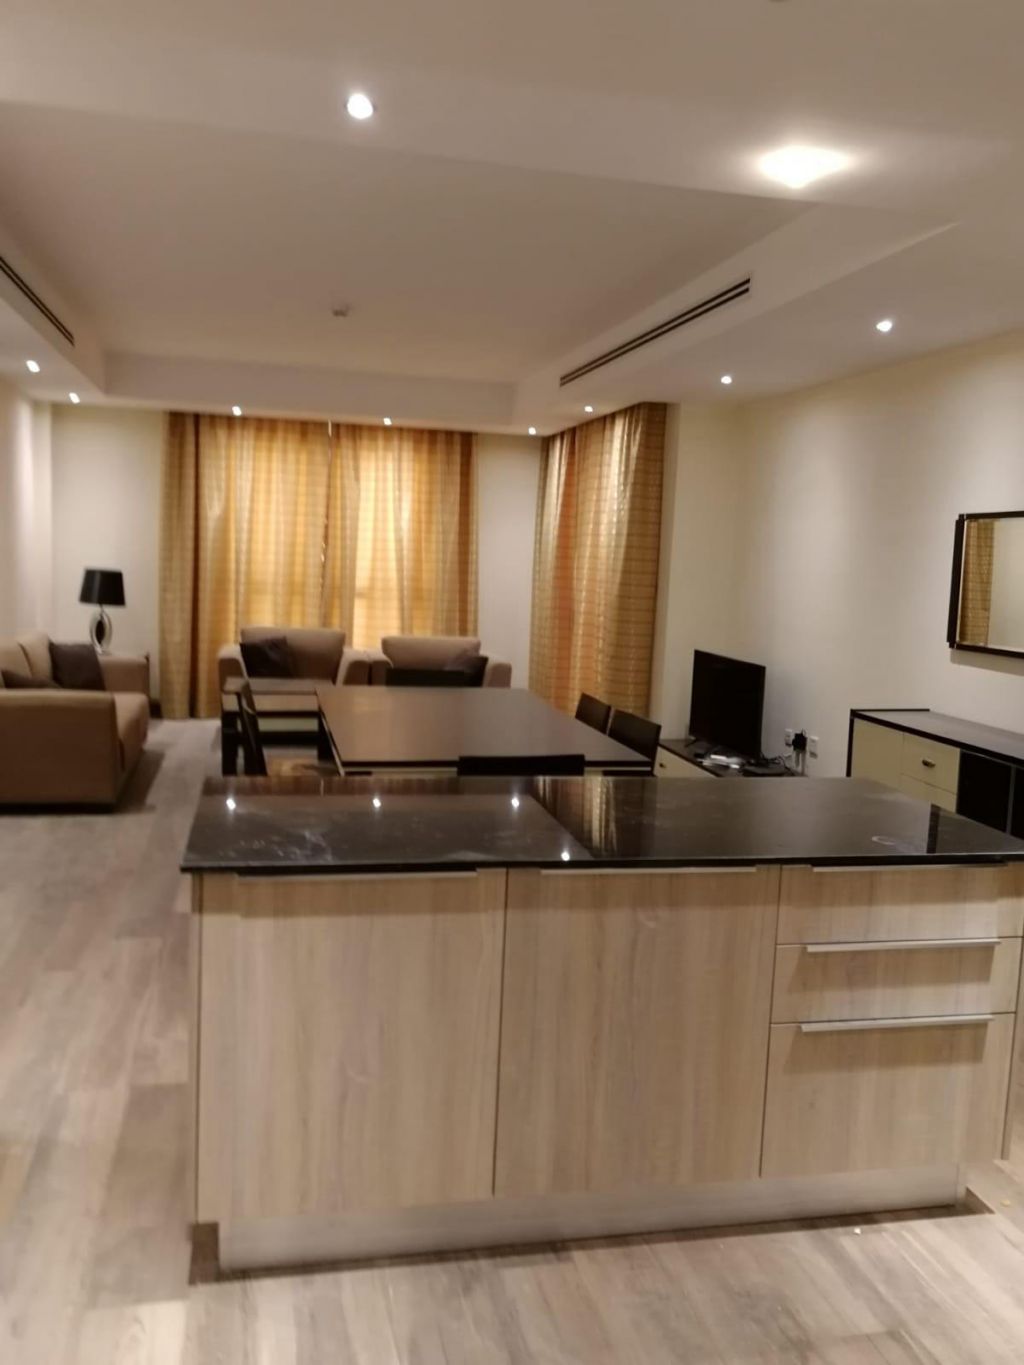 Residential Property 1 Bedroom F/F Apartment  for rent in Lusail , Doha-Qatar #16469 - 1  image 